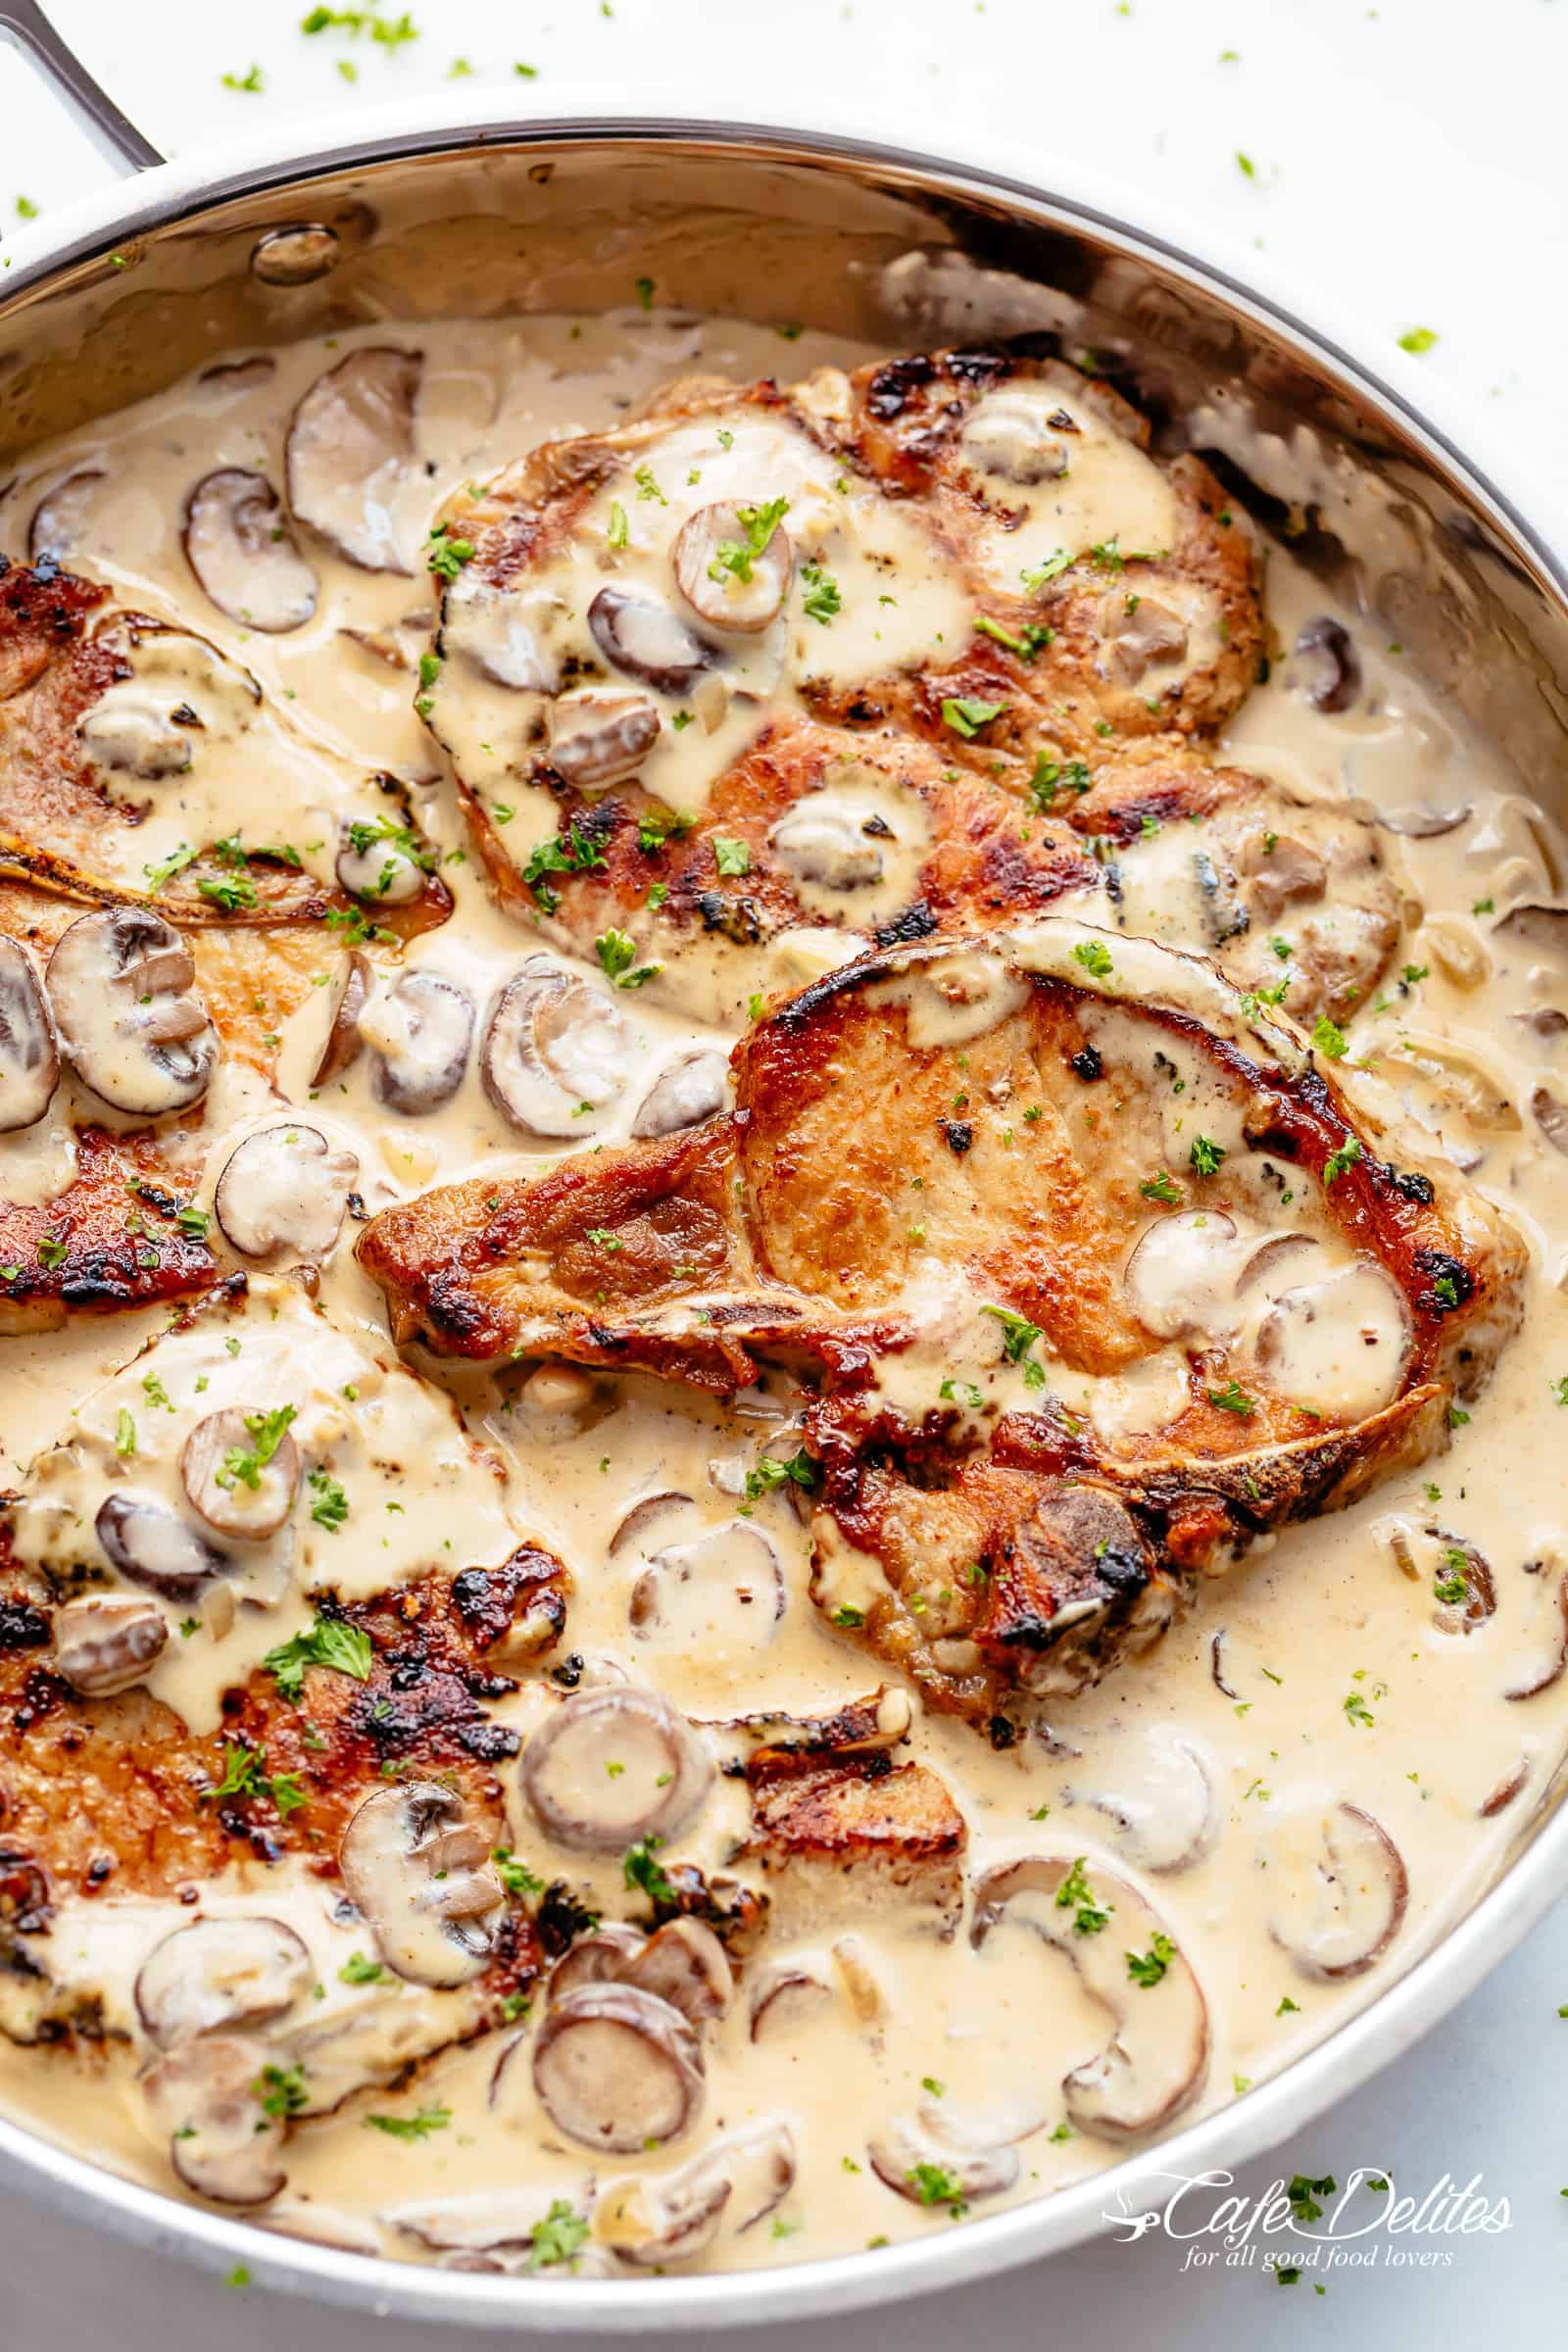 Pork Chops With Creamy Mushroom Sauce Cafe Delites,How To Get Rid Of Small Black Ants